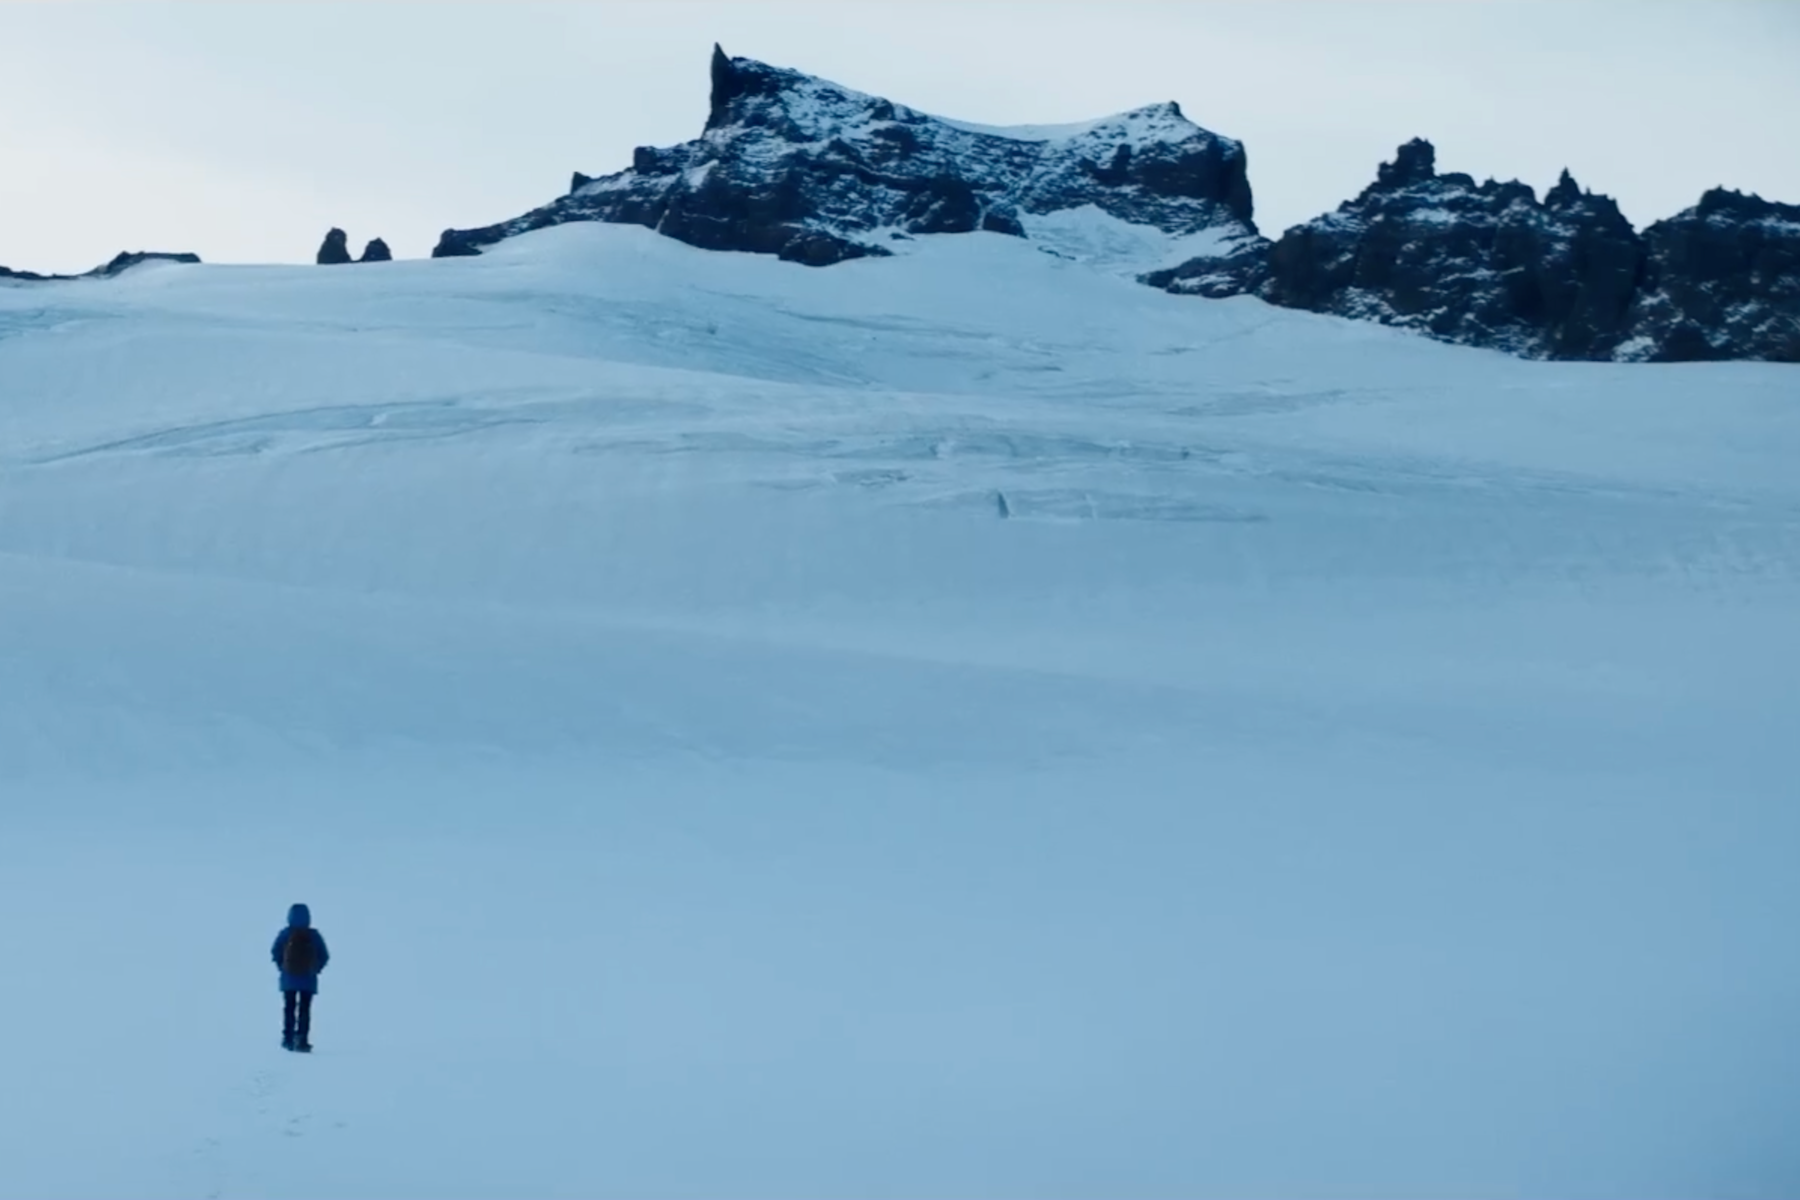 Shot entirely on location in Iceland. Serviced and co-produced by Truenorth.